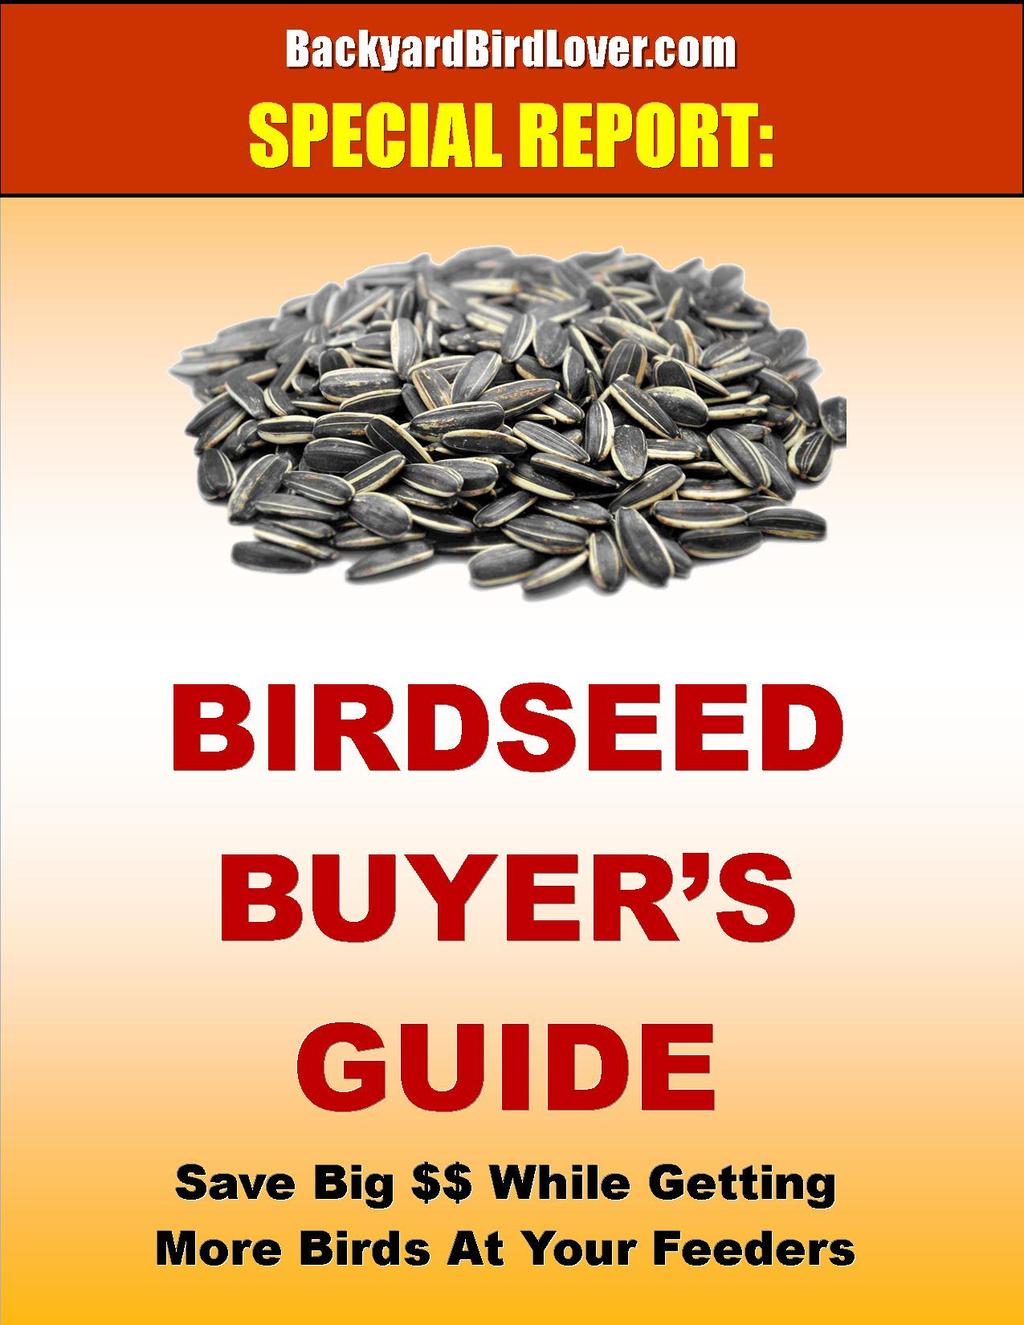 BIRDSEED BUYER S GUIDE How To Save Big $$ While Getting More Birds At